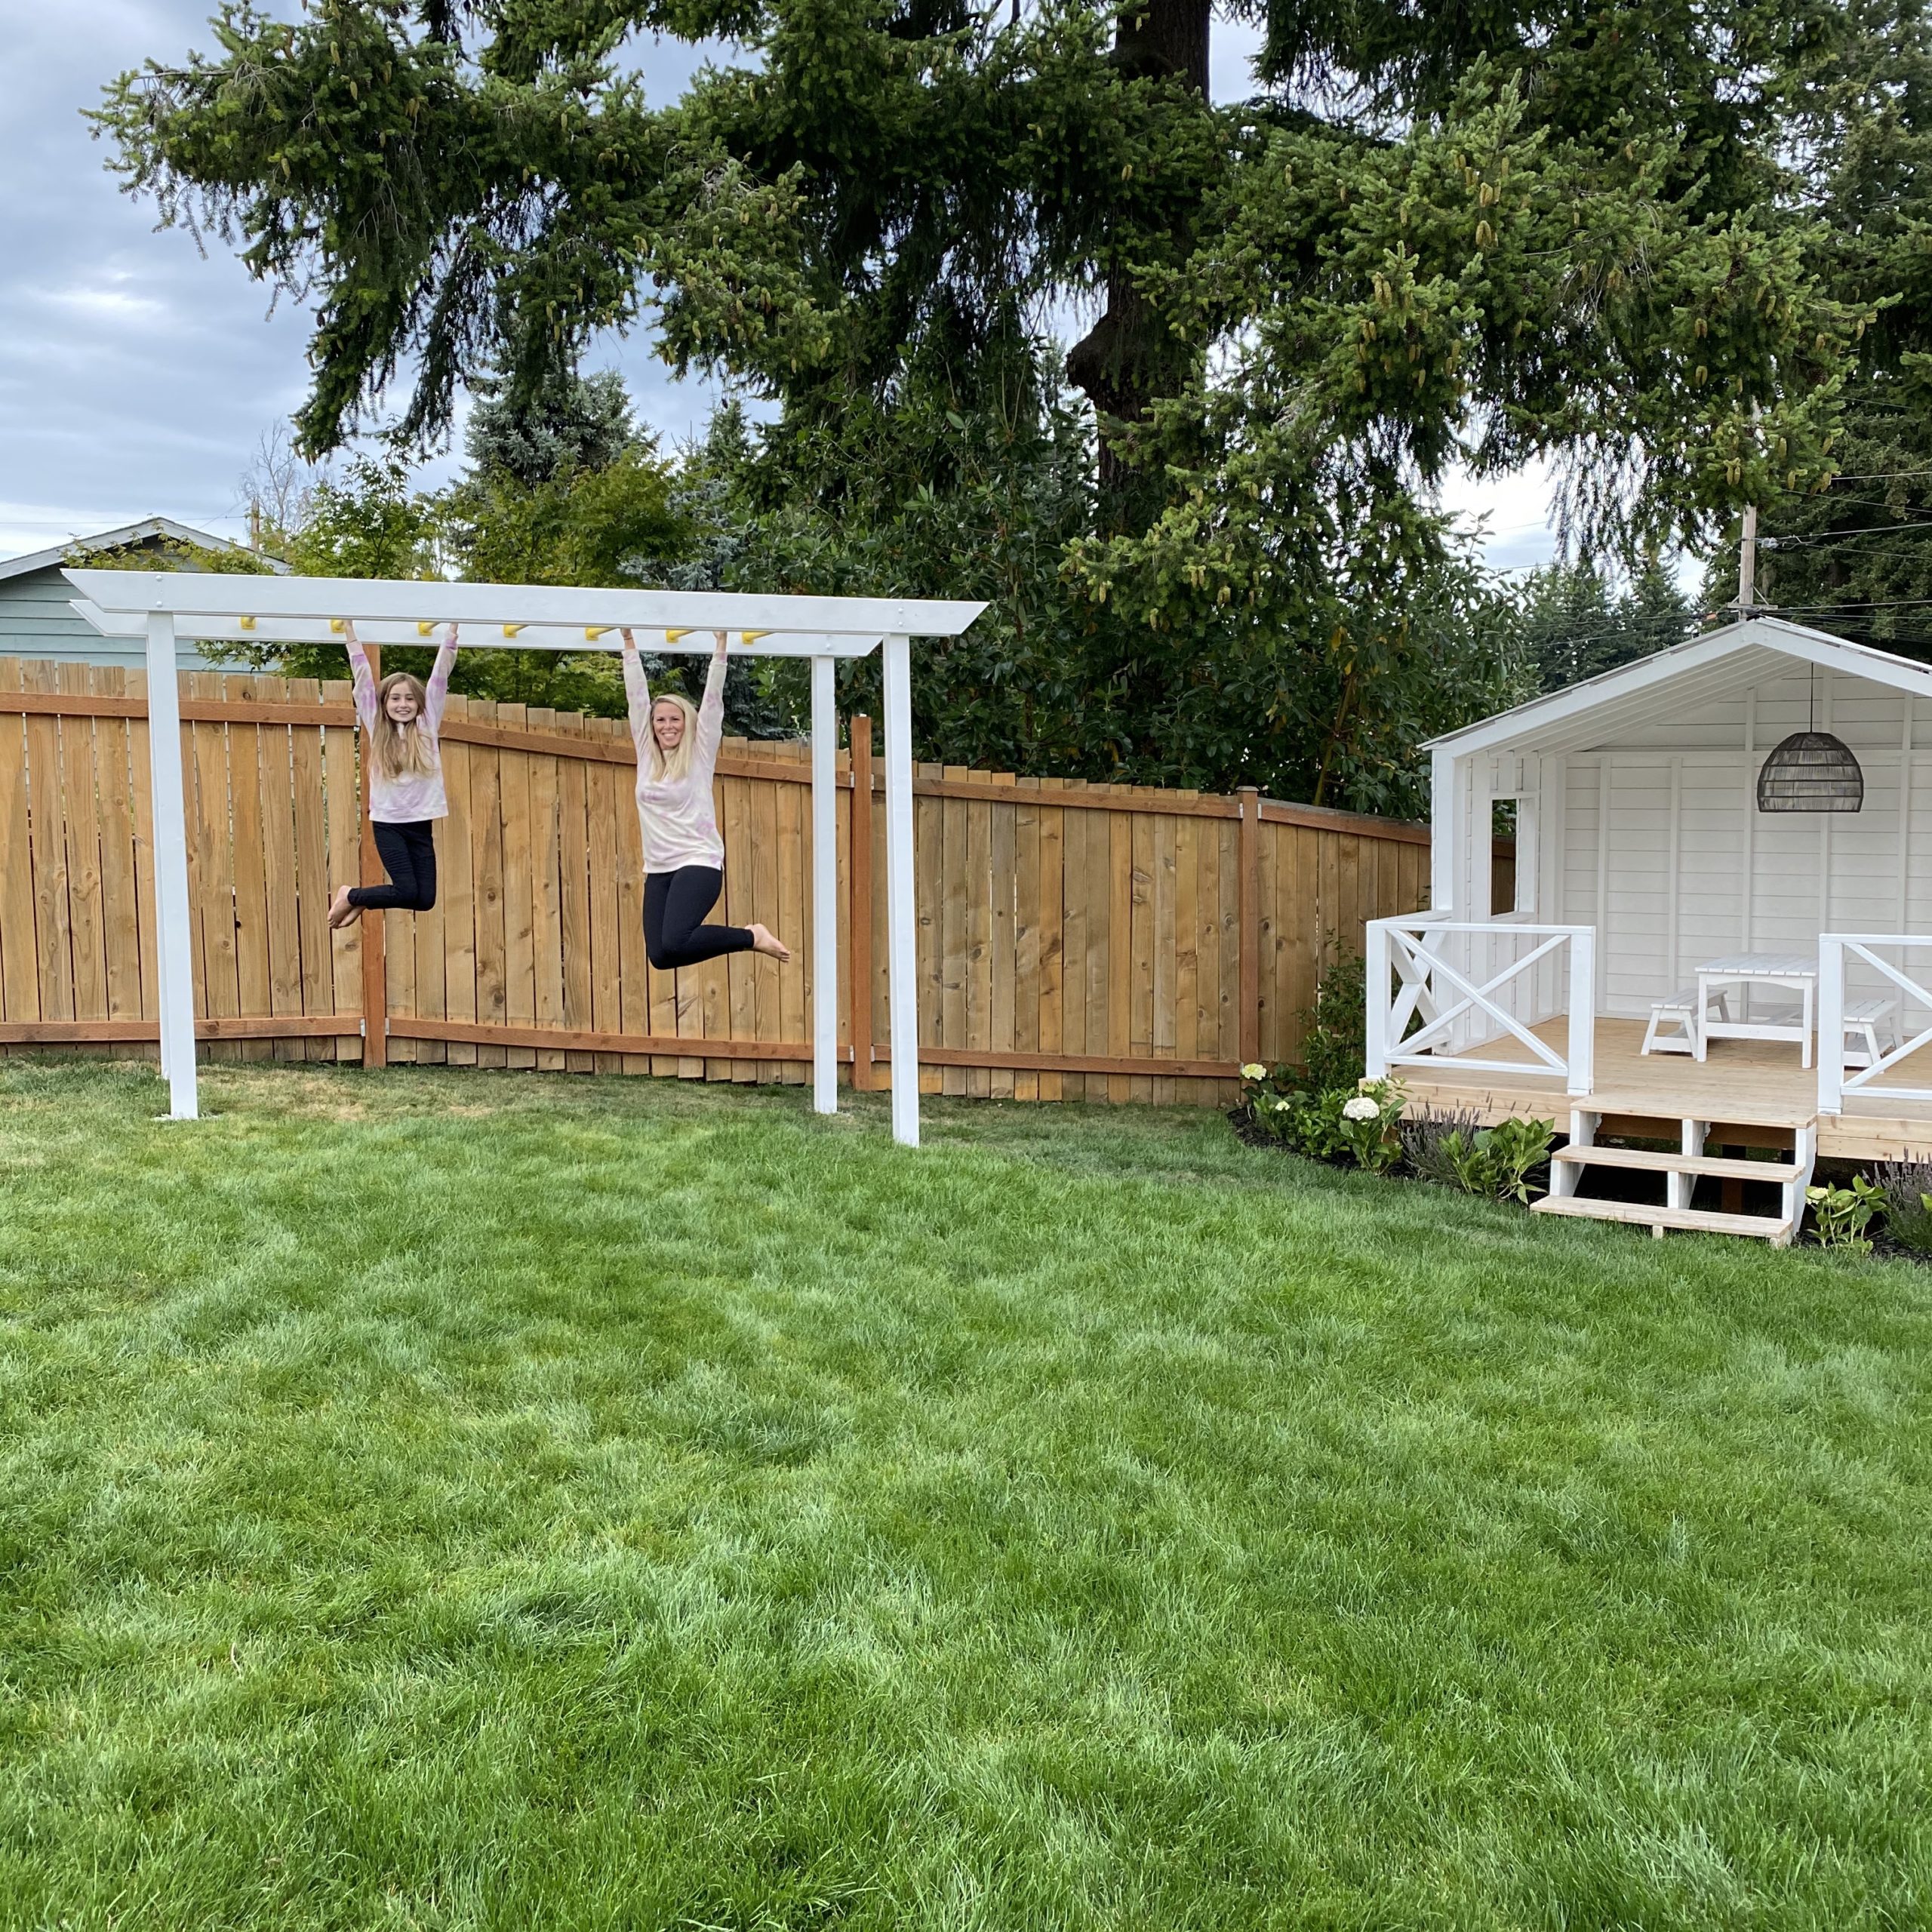 Diy How To Build Monkey Bars Dreaming Of Homemaking